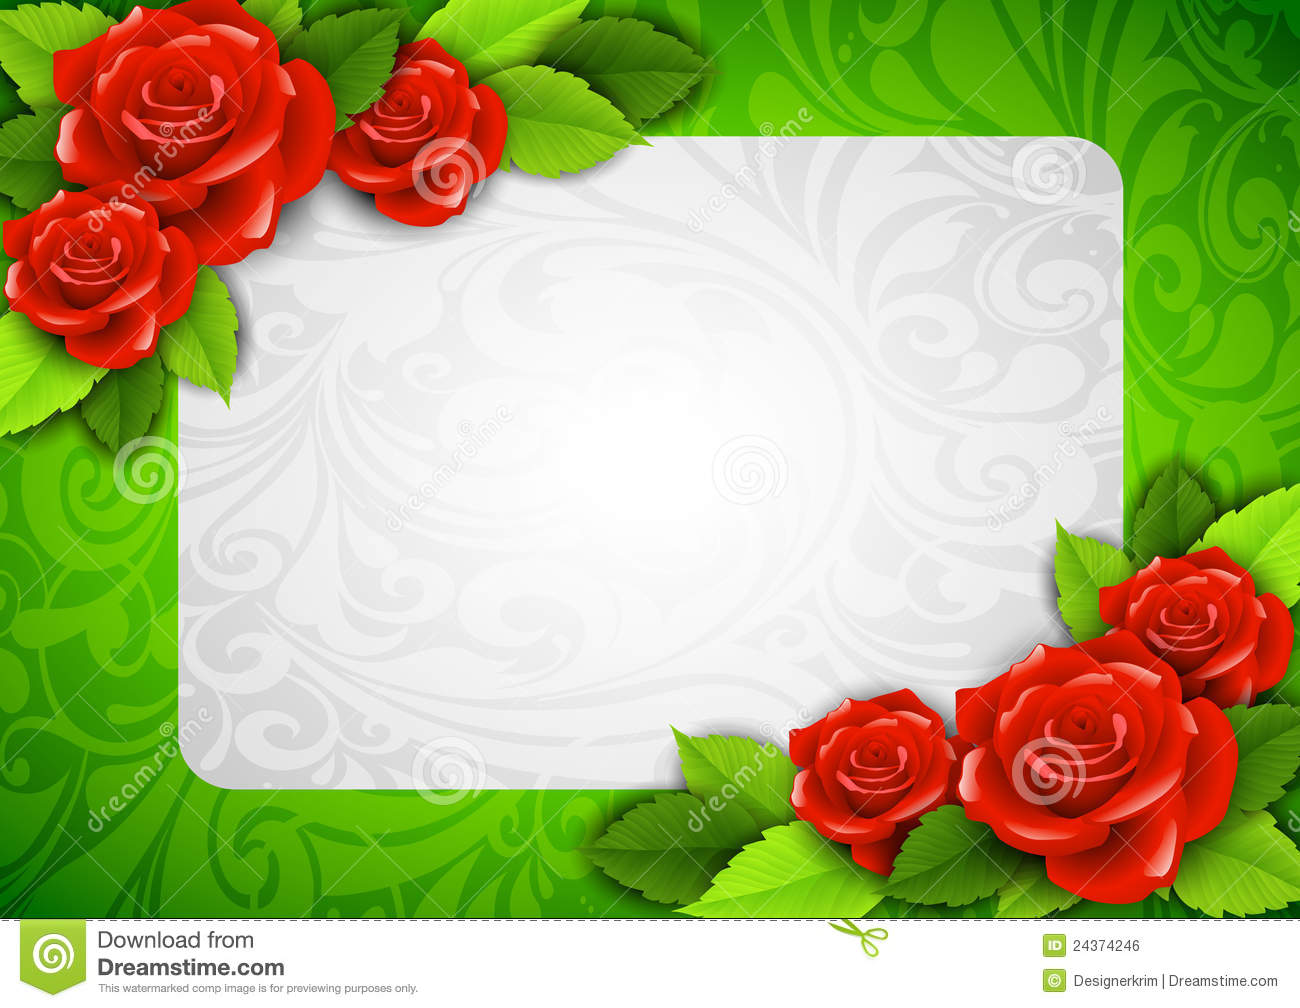 Background Images With Roses Clipground